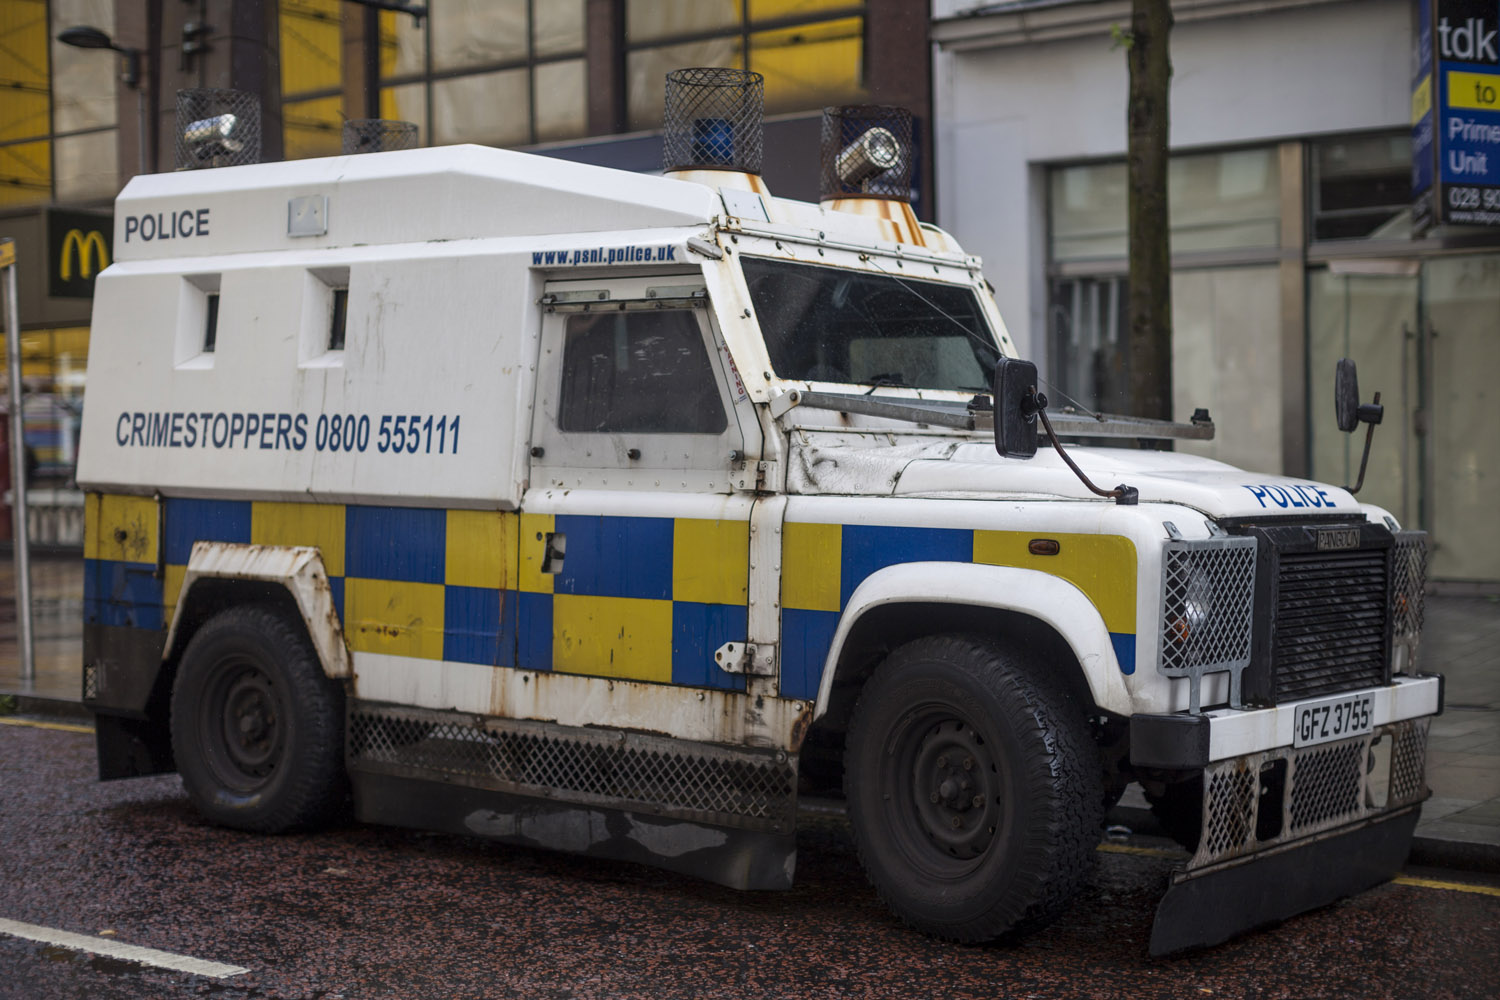 Police in the centre of Belfast protecting a Protestant parade. After decades of violence, a significant portion of the police's vehicles are practically armoured cars, and police stations are fortified with protective cages and bullet-proof windows, even after the police was reformed under the Good Friday Agreement, turning from the largely Protestant RUC (Royal Ulster Constabulary) to the neutral and theoretically mixed PSNI (Police Service of Northern Ireland).